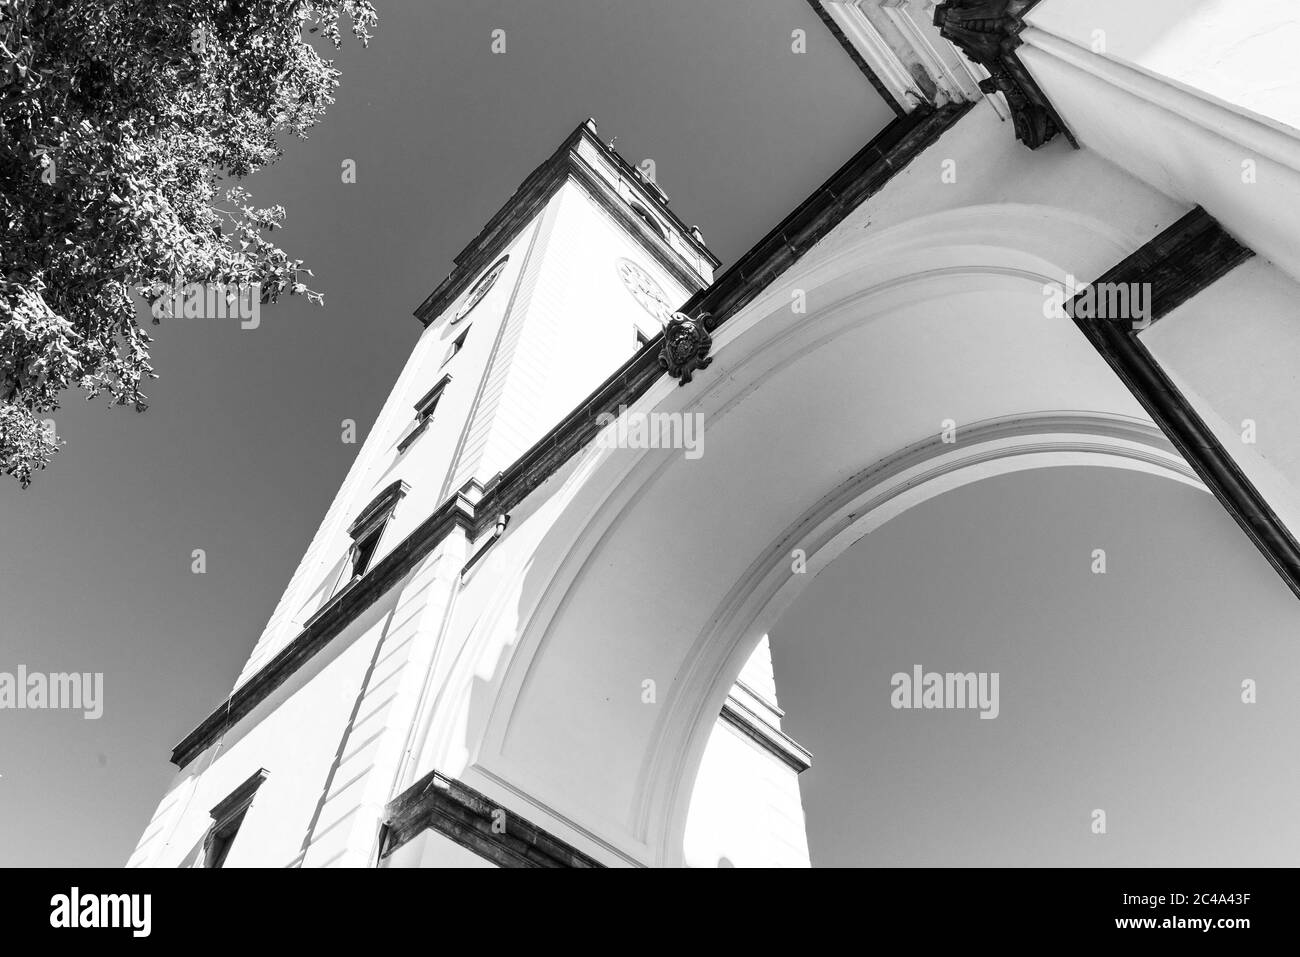 Bohemian baroque architecture Black and White Stock Photos & Images - Alamy